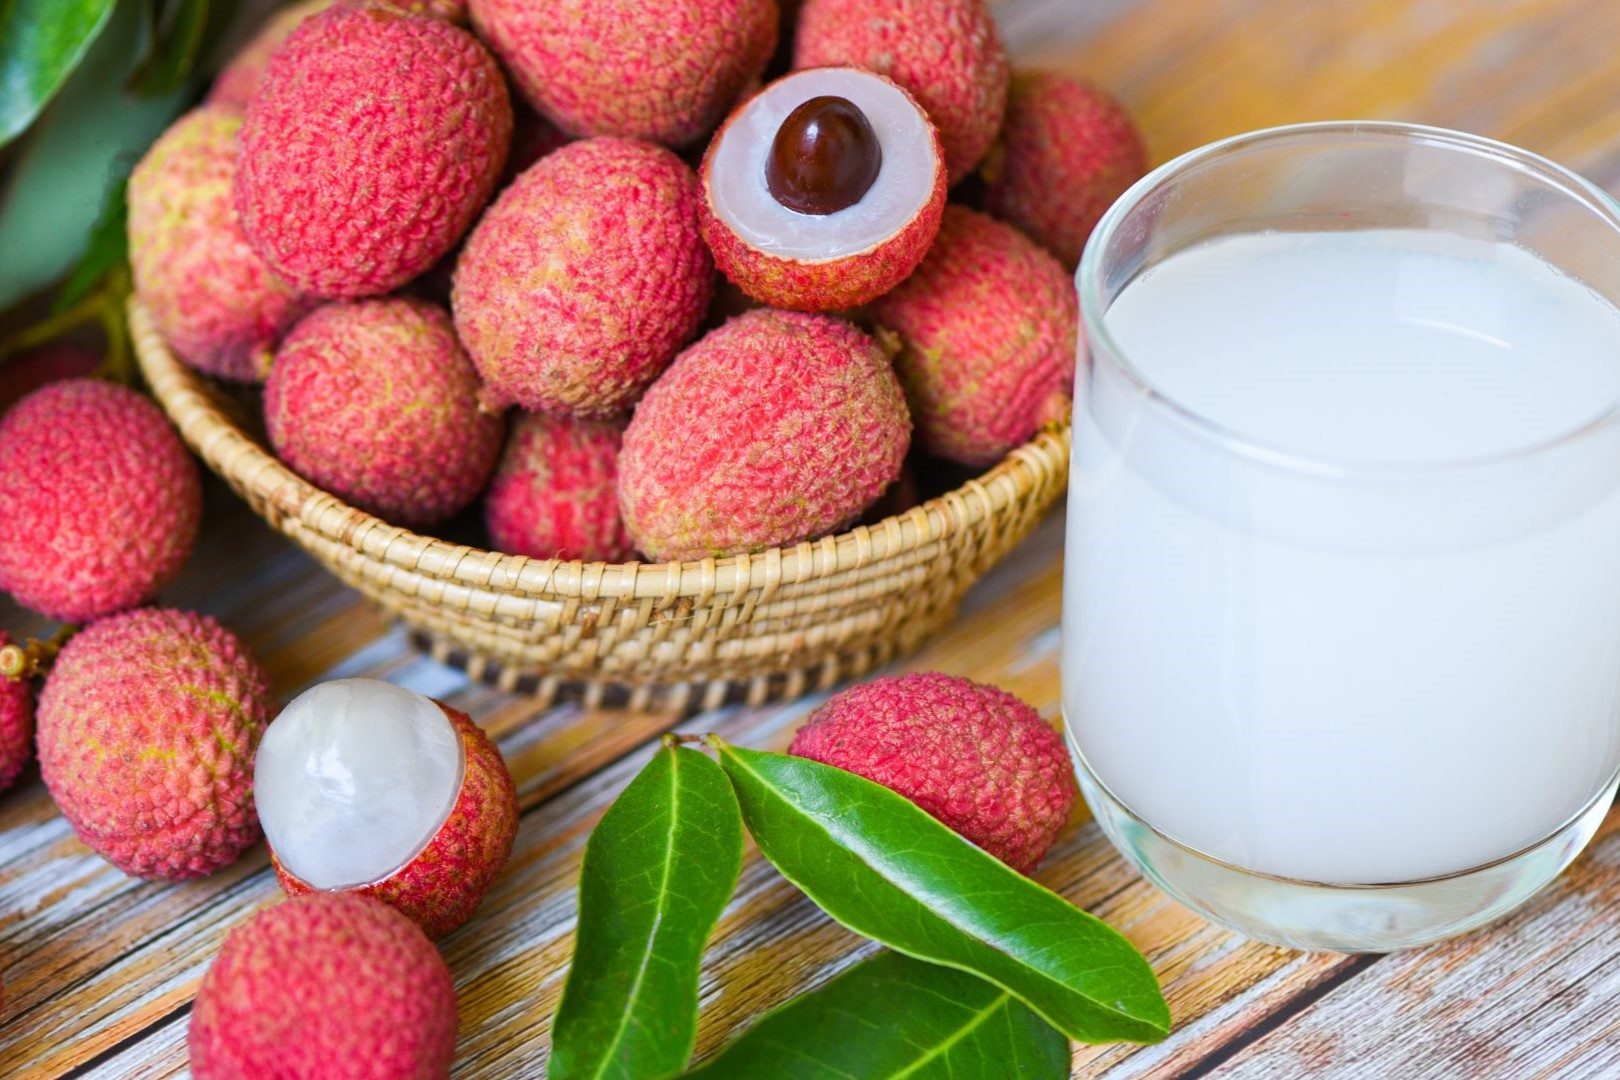 Discover The Surprising Truth About Lychees: Why Some Love Them And Others Can’t Stand Them!